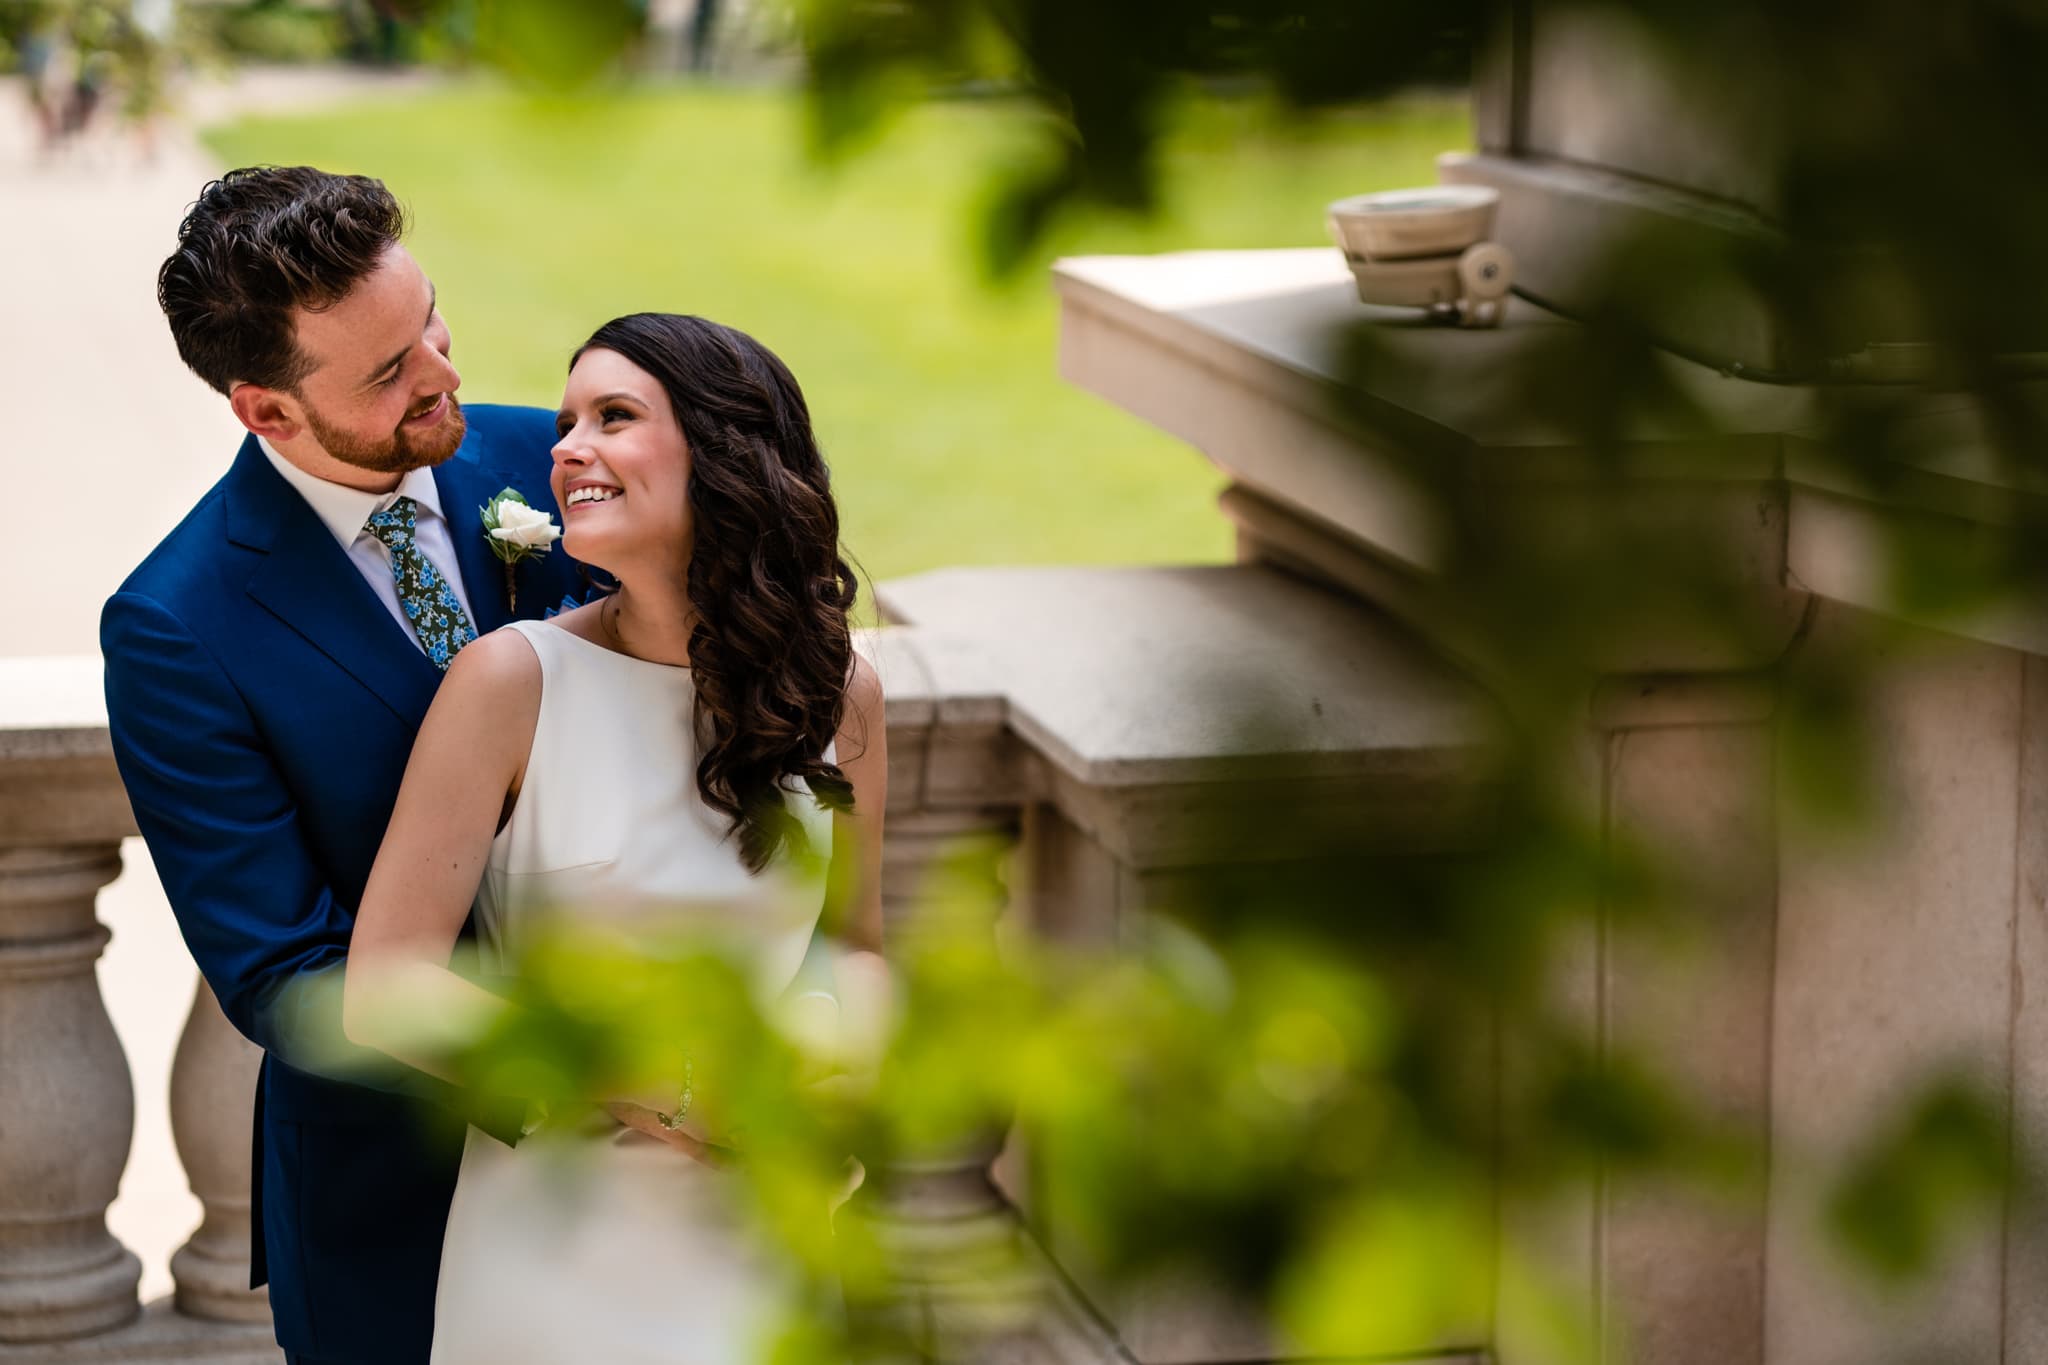 Wedding Photo Locations in Chicago